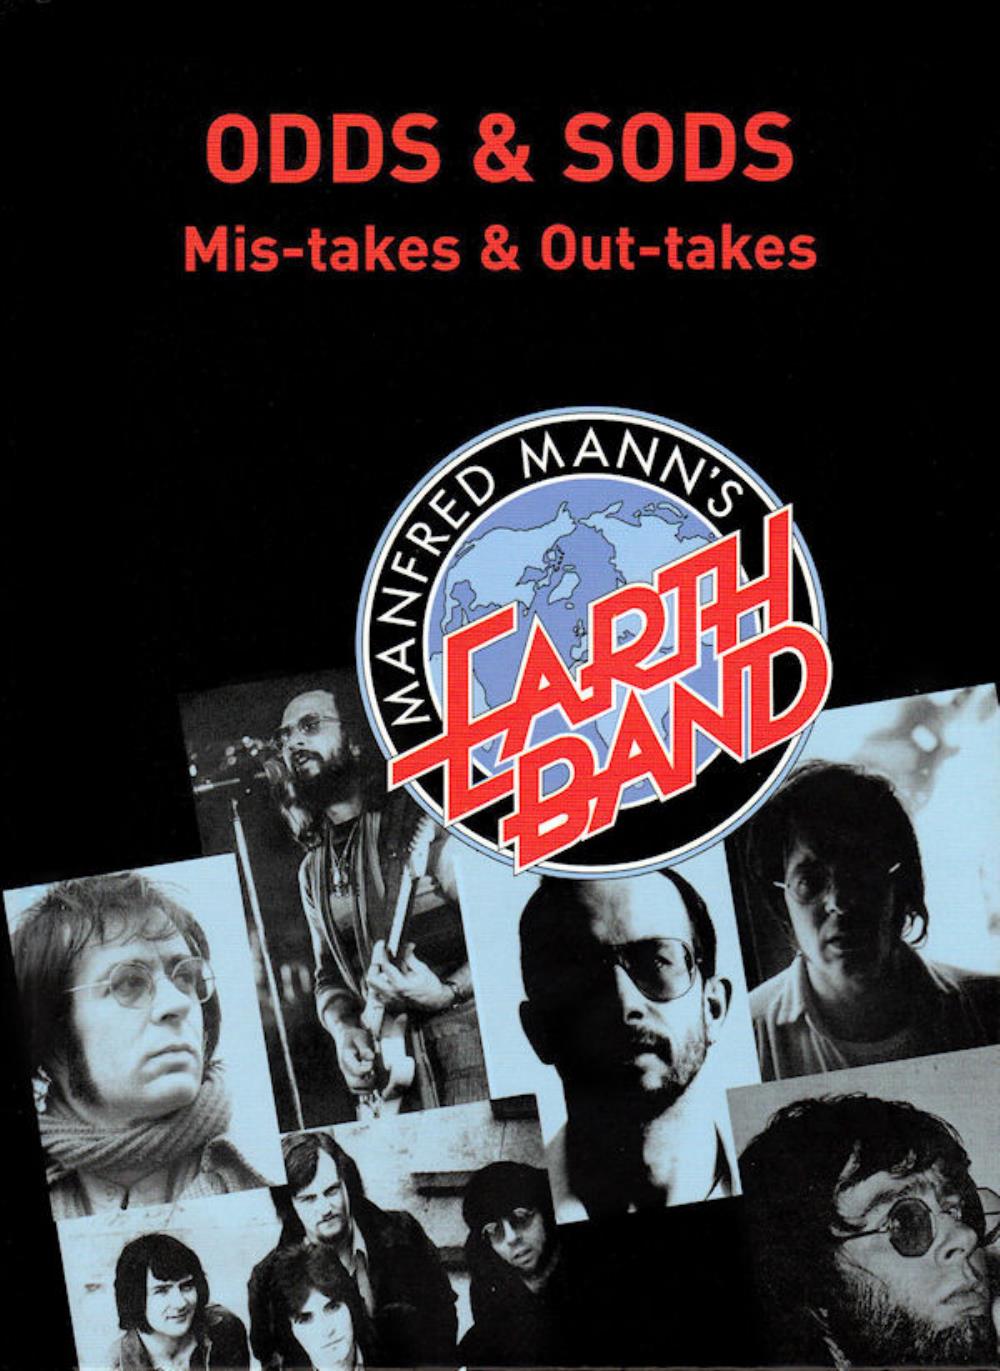 Manfred Mann's Earth Band Odds & Sods (Mis-Takes & Out-Takes) album cover